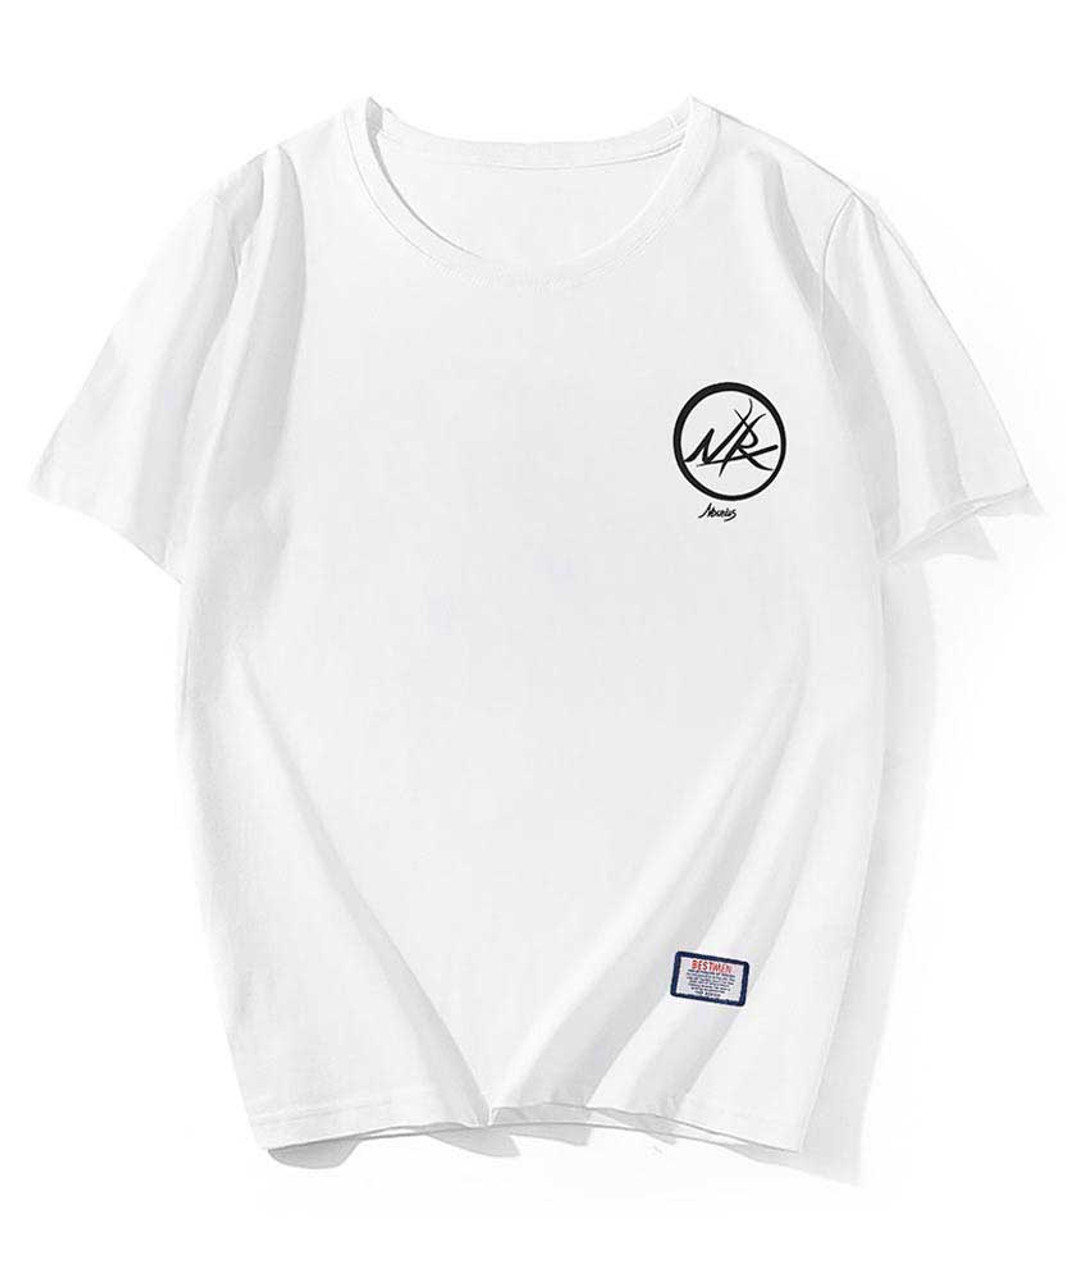 White short sleeve t shirt with circle letter pattern | Mens t-shirts ...